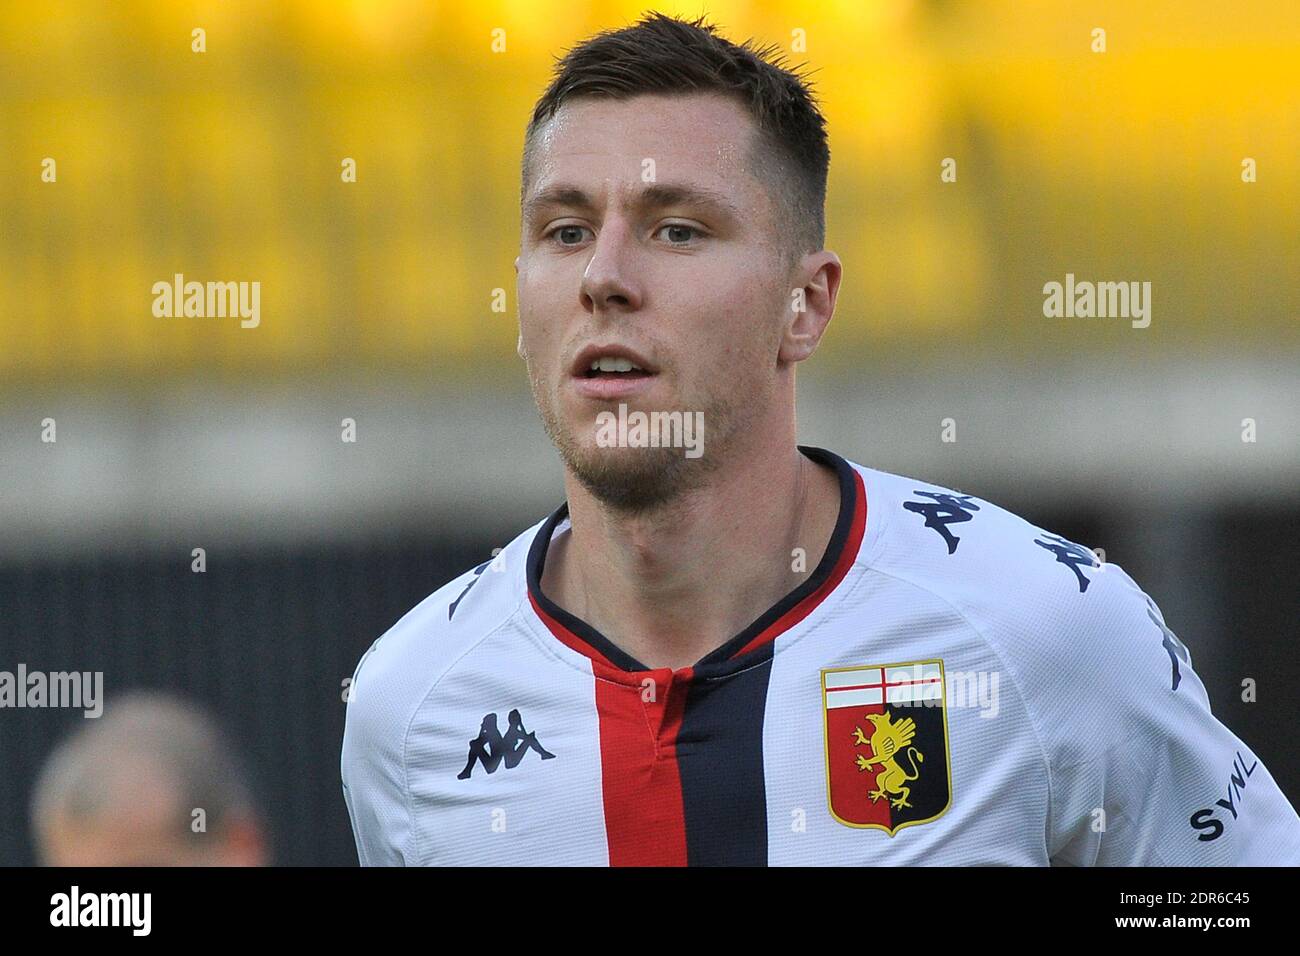 Benevento, Italy. 20th Dec, 2020. Lukas Lerager player of Genoa, during the match of the Italian football league Serie A between Benevento vs Genoa, final result 2-0, match played at the Ciro Vigorito stadium in Benevento. Italy, December 20, 2020. (Photo by Vincenzo Izzo/Sipa USA) Credit: Sipa USA/Alamy Live News Stock Photo